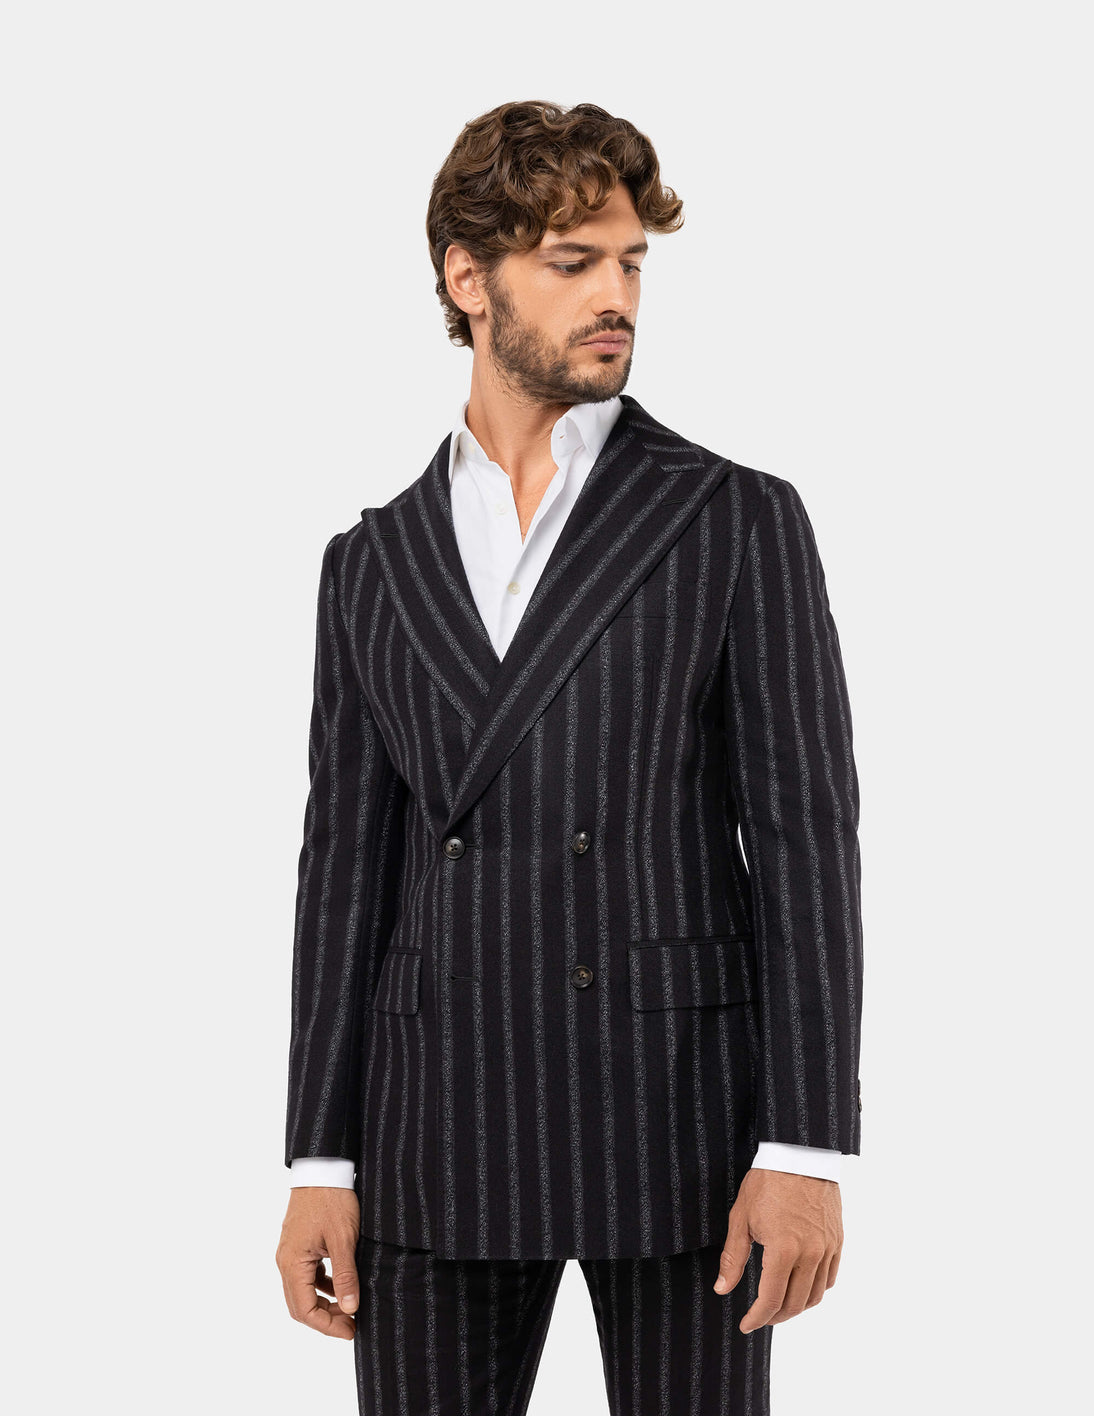 Black White Stripes Double Breasted Suit - Samir Bachkami